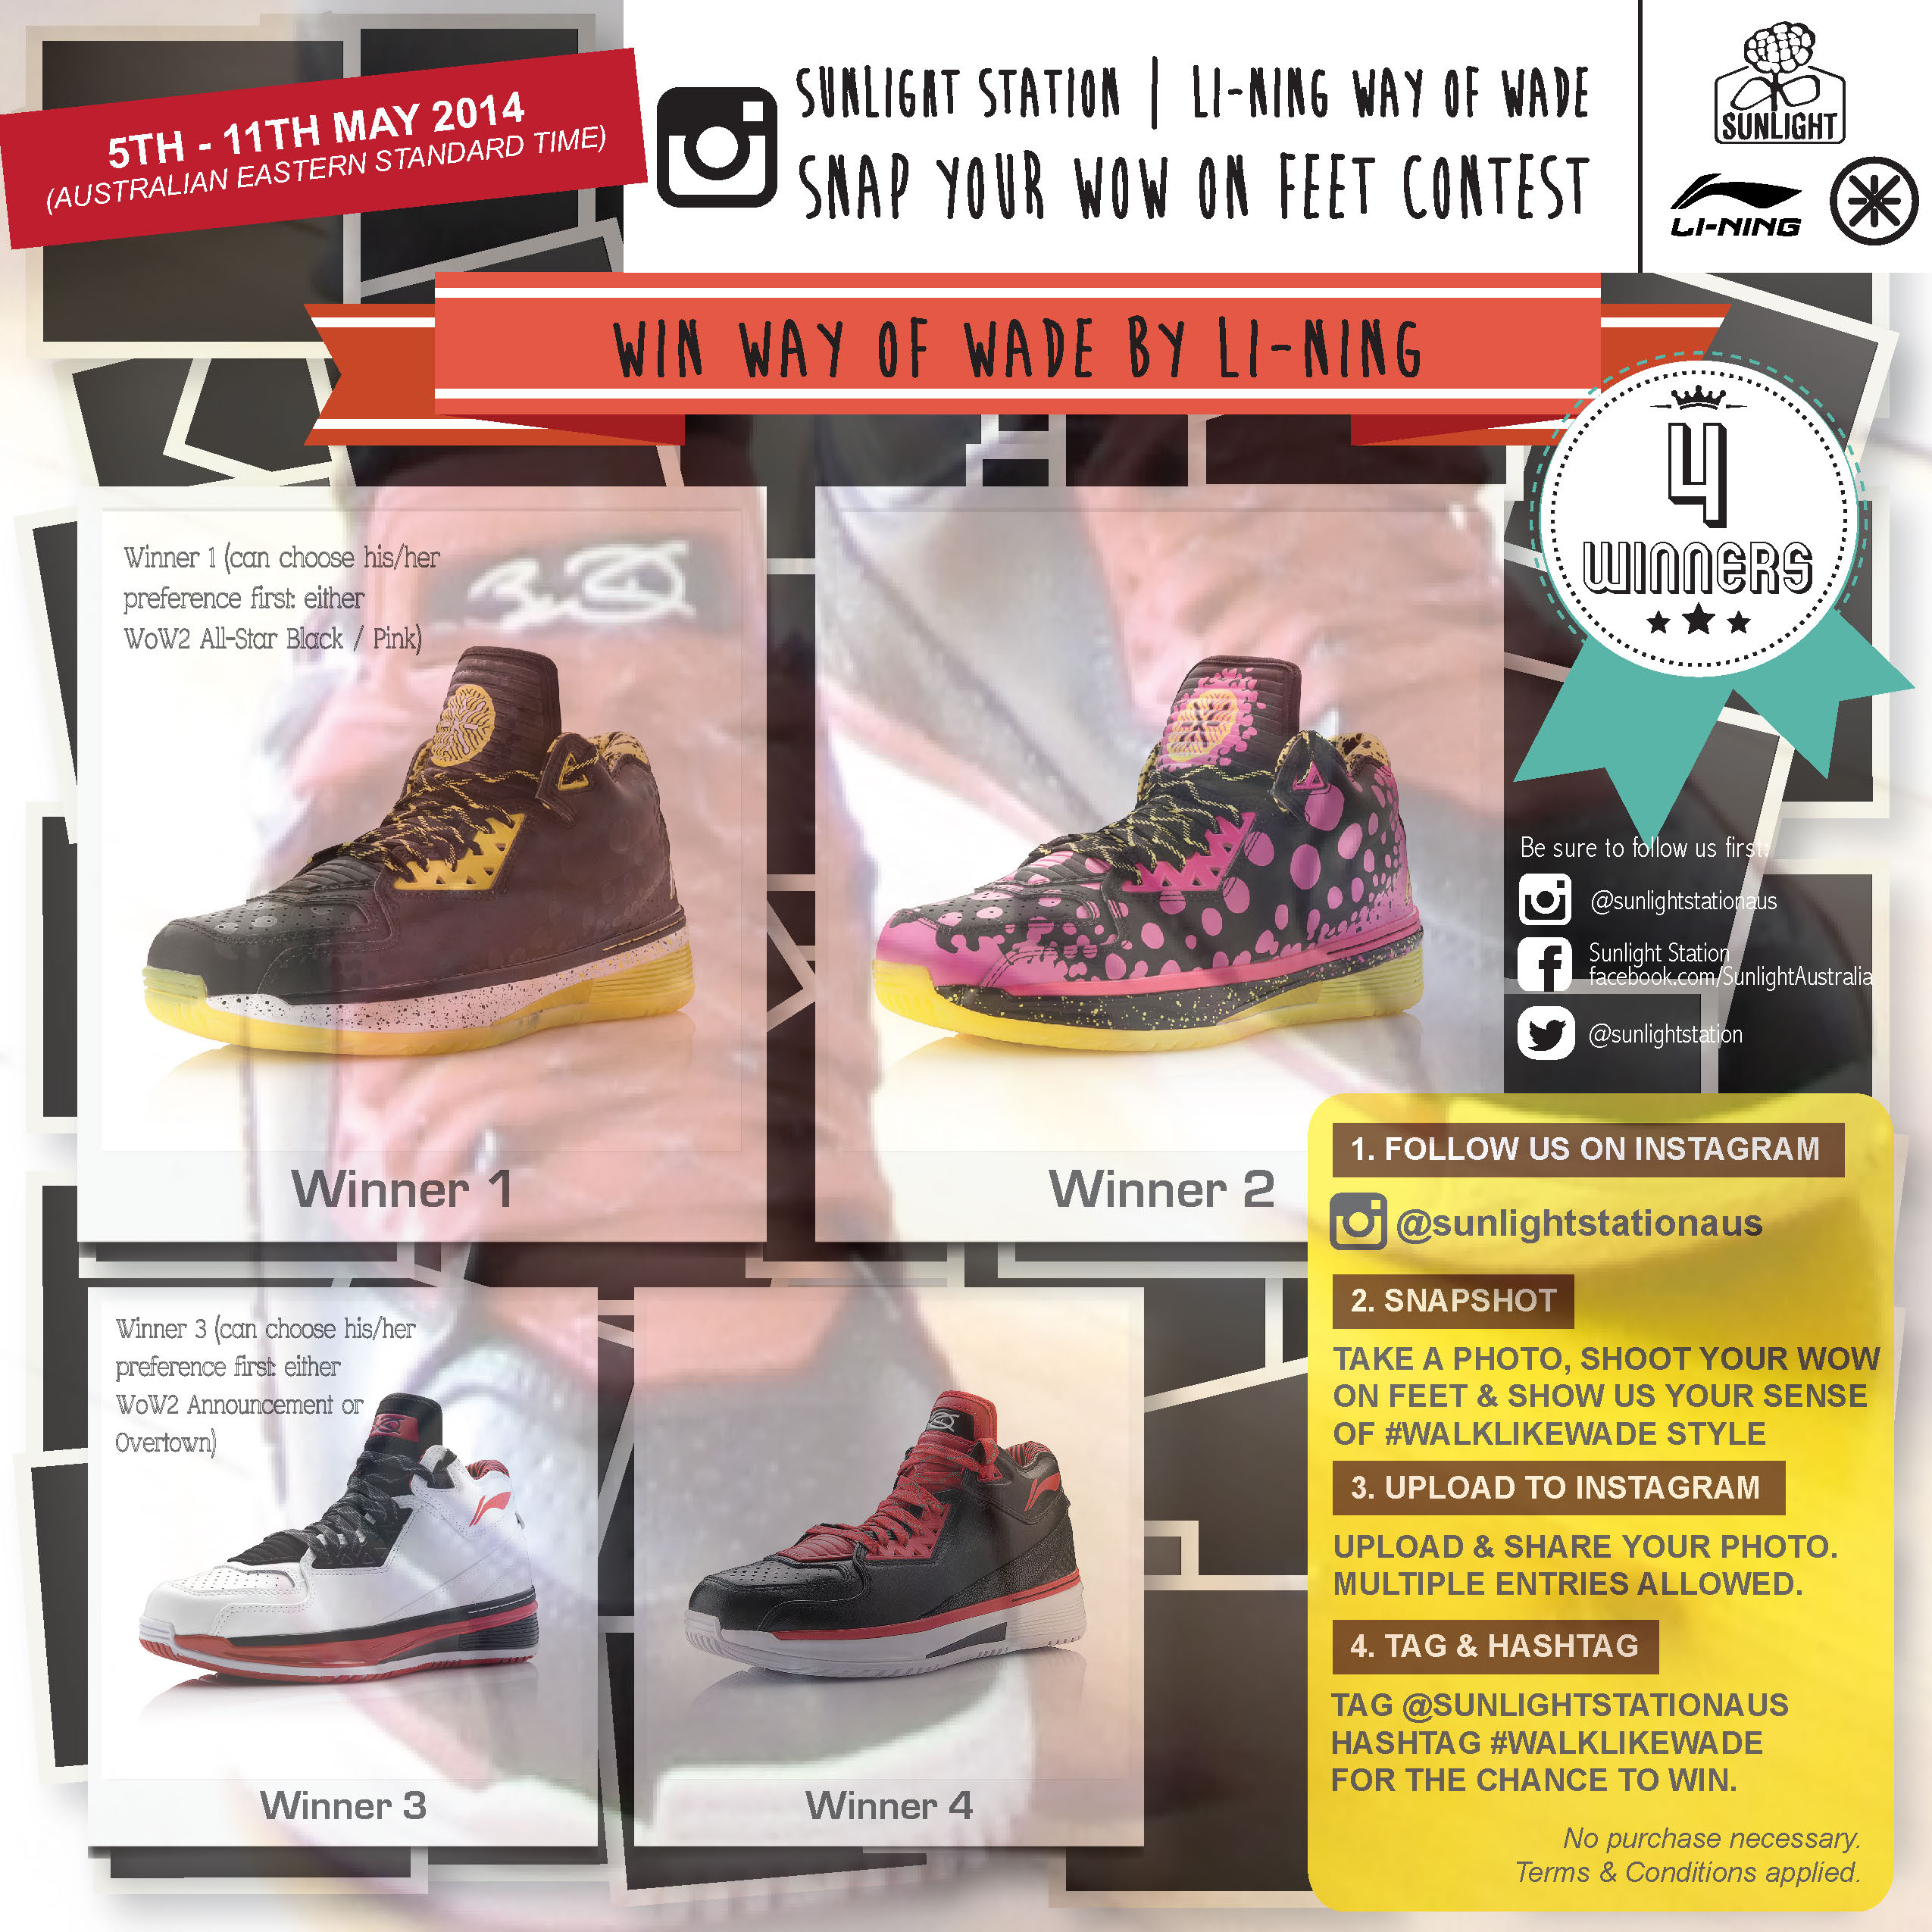 Snap your WoW on Feet Contest